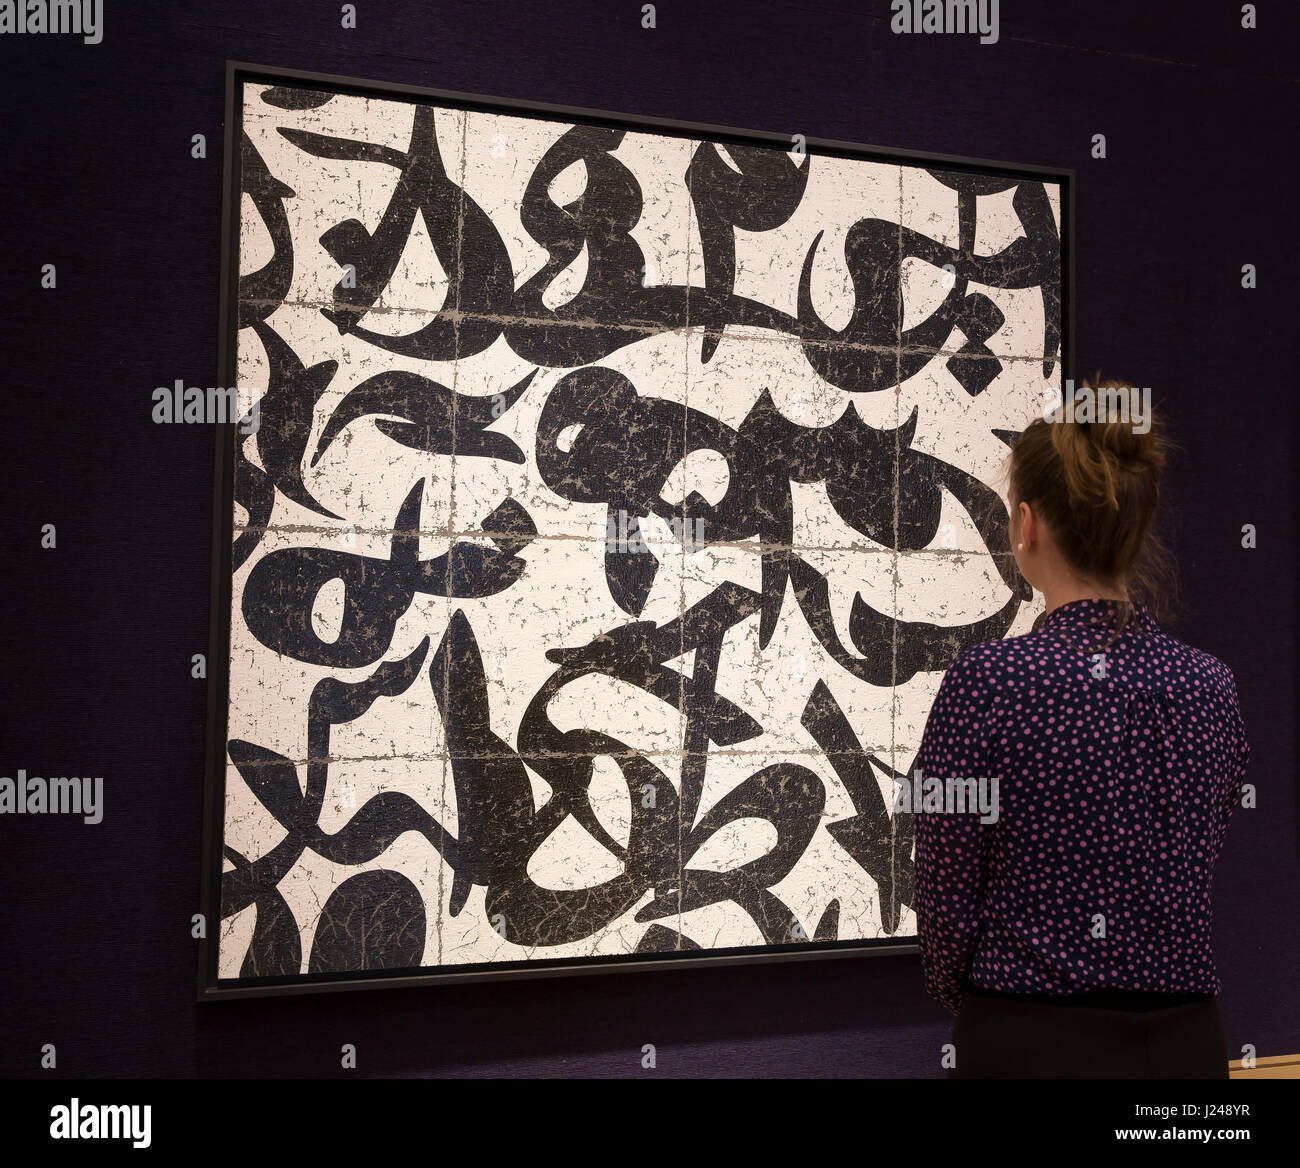 Mayfair, UK. 24th Apr, 2017. A Photocall for Masterpieces of Modern Middle Eastern Art at Bonhams in Mayfair took place prior to the Sale on the 26th April 2017. Highlights included 842L1 by Farhad Moshiri Credit: Keith Larby/Alamy Live News Stock Photo